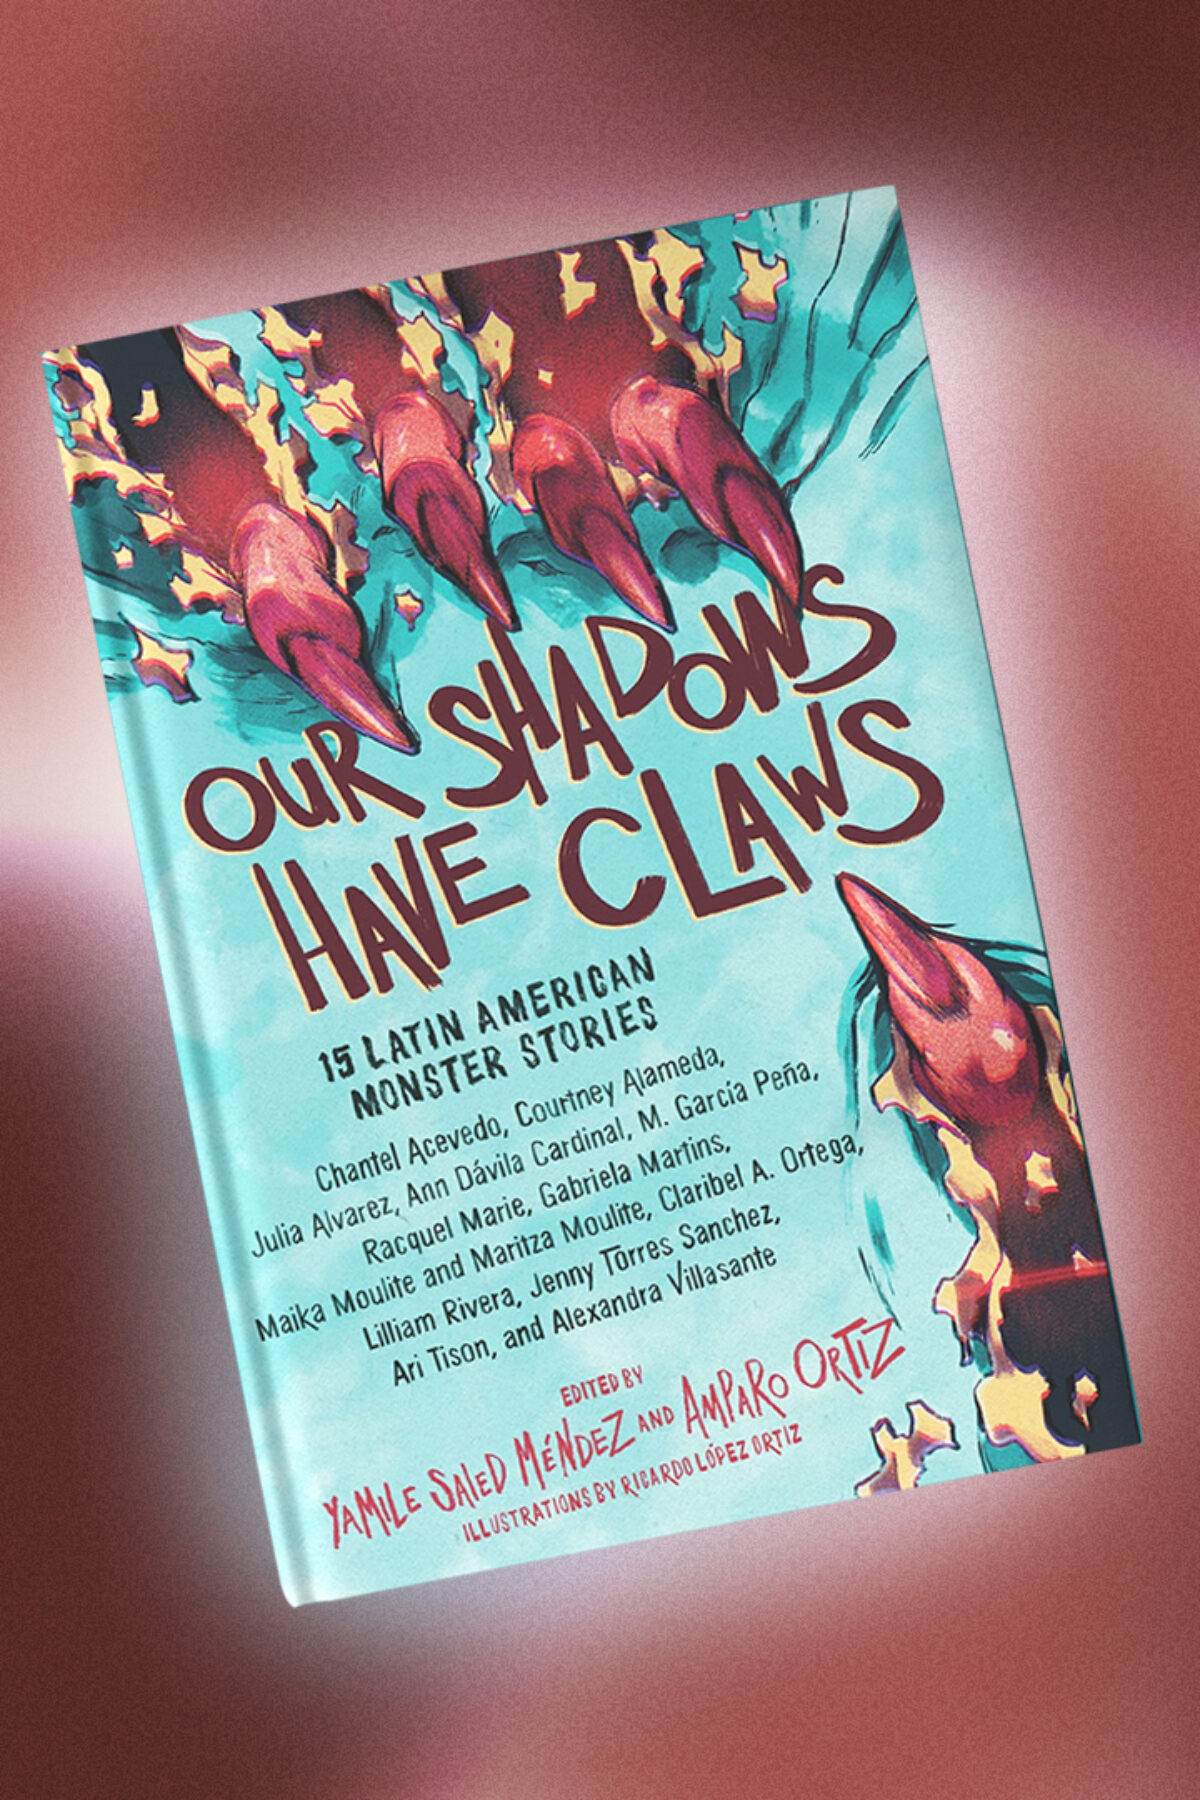 Our Shadows Have Claws book edited by Tamile Saied Mendez and Amparo Ortiz